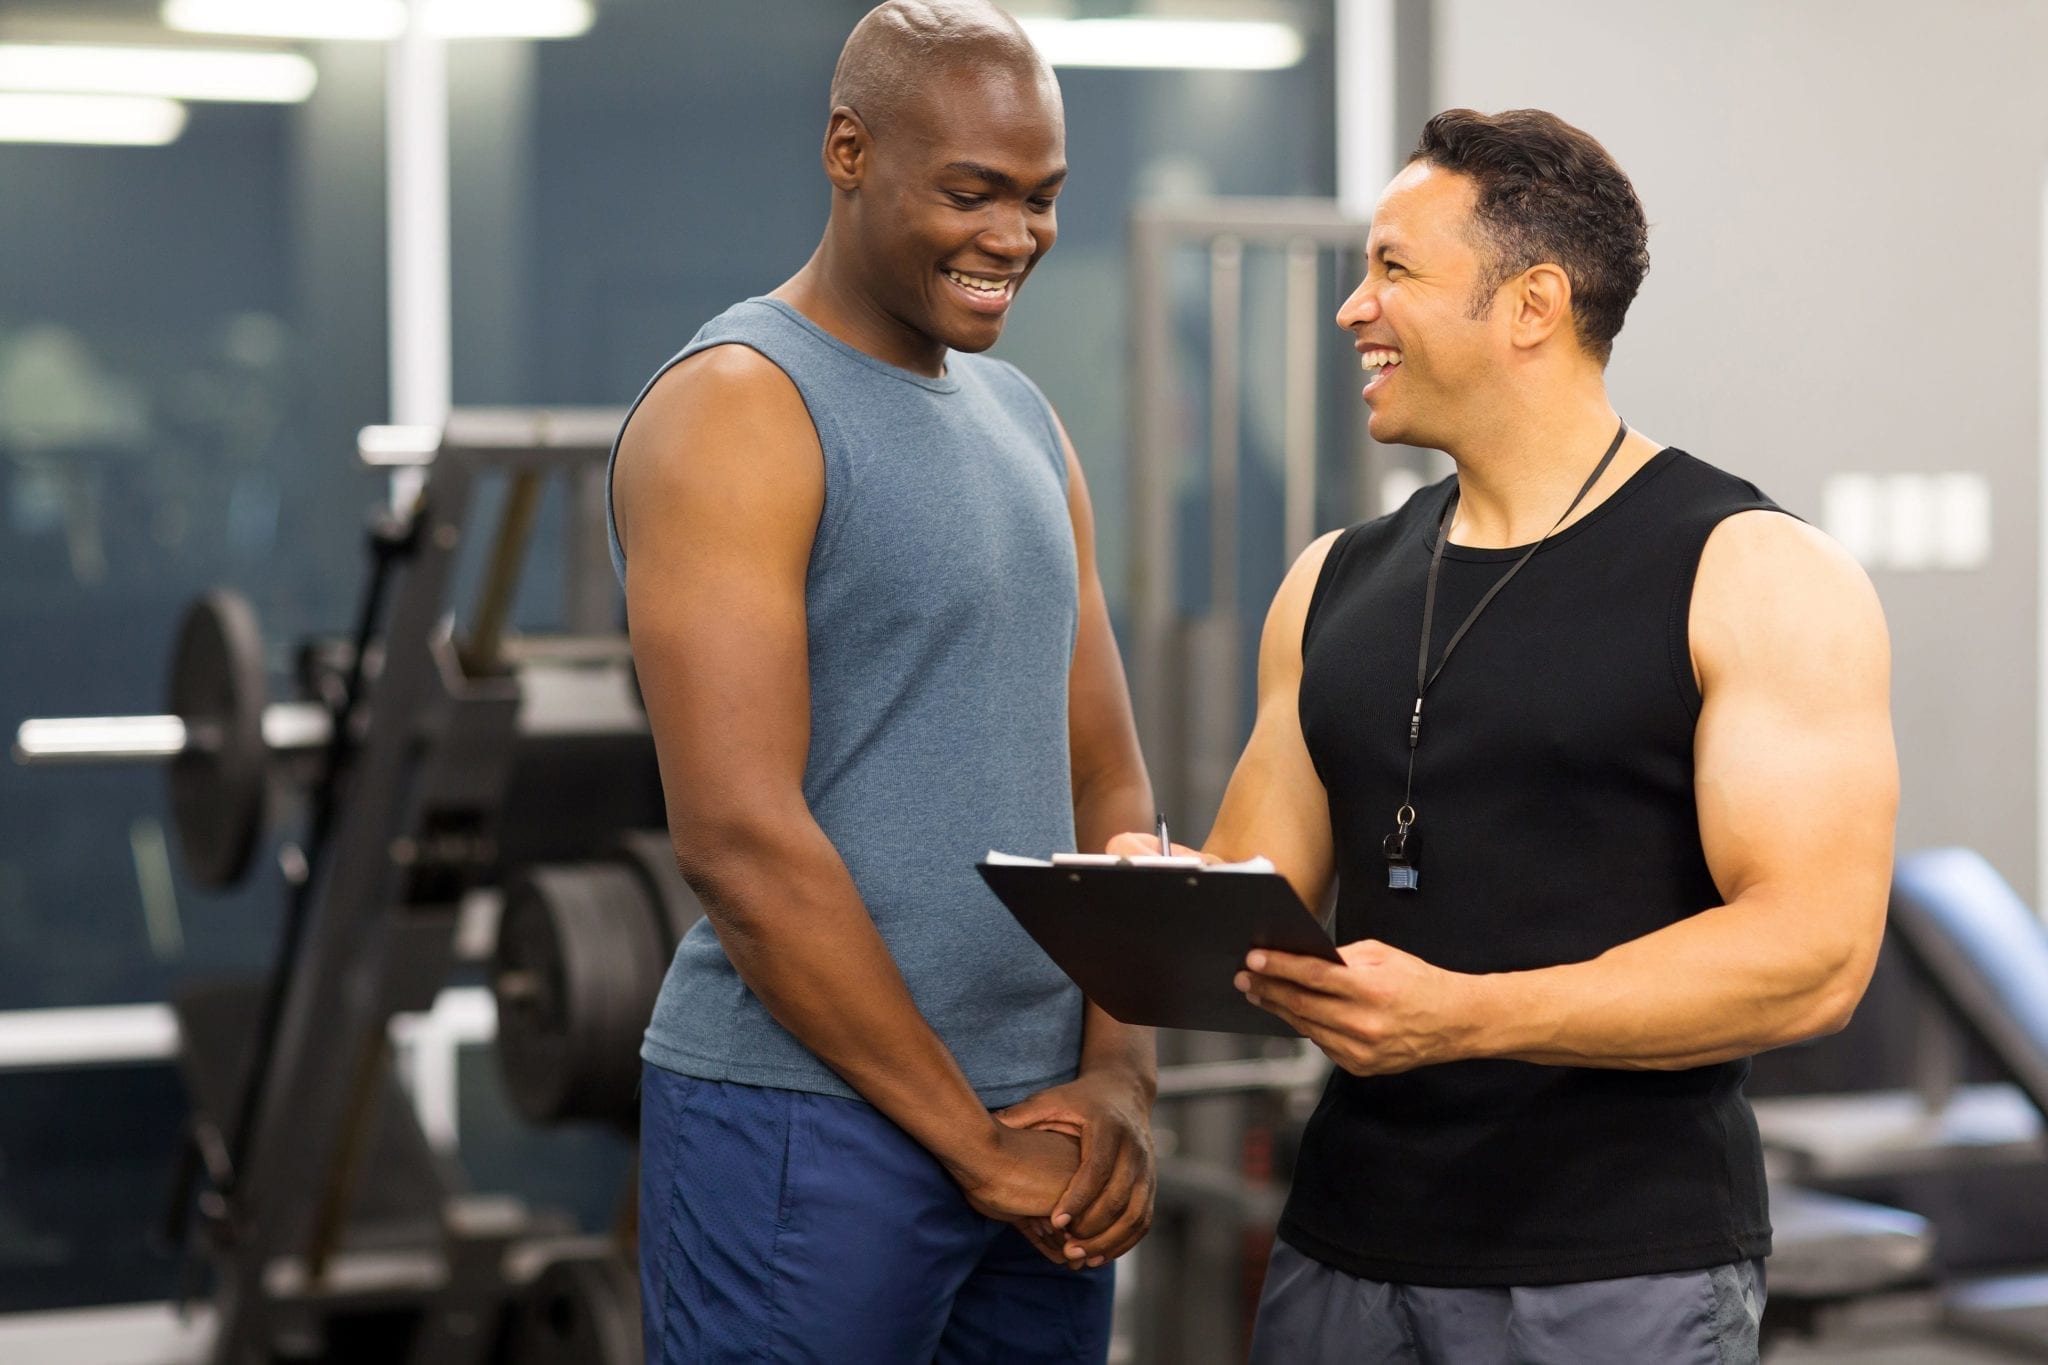 Insights Your Fitness Center Could Gain from Member Surveys